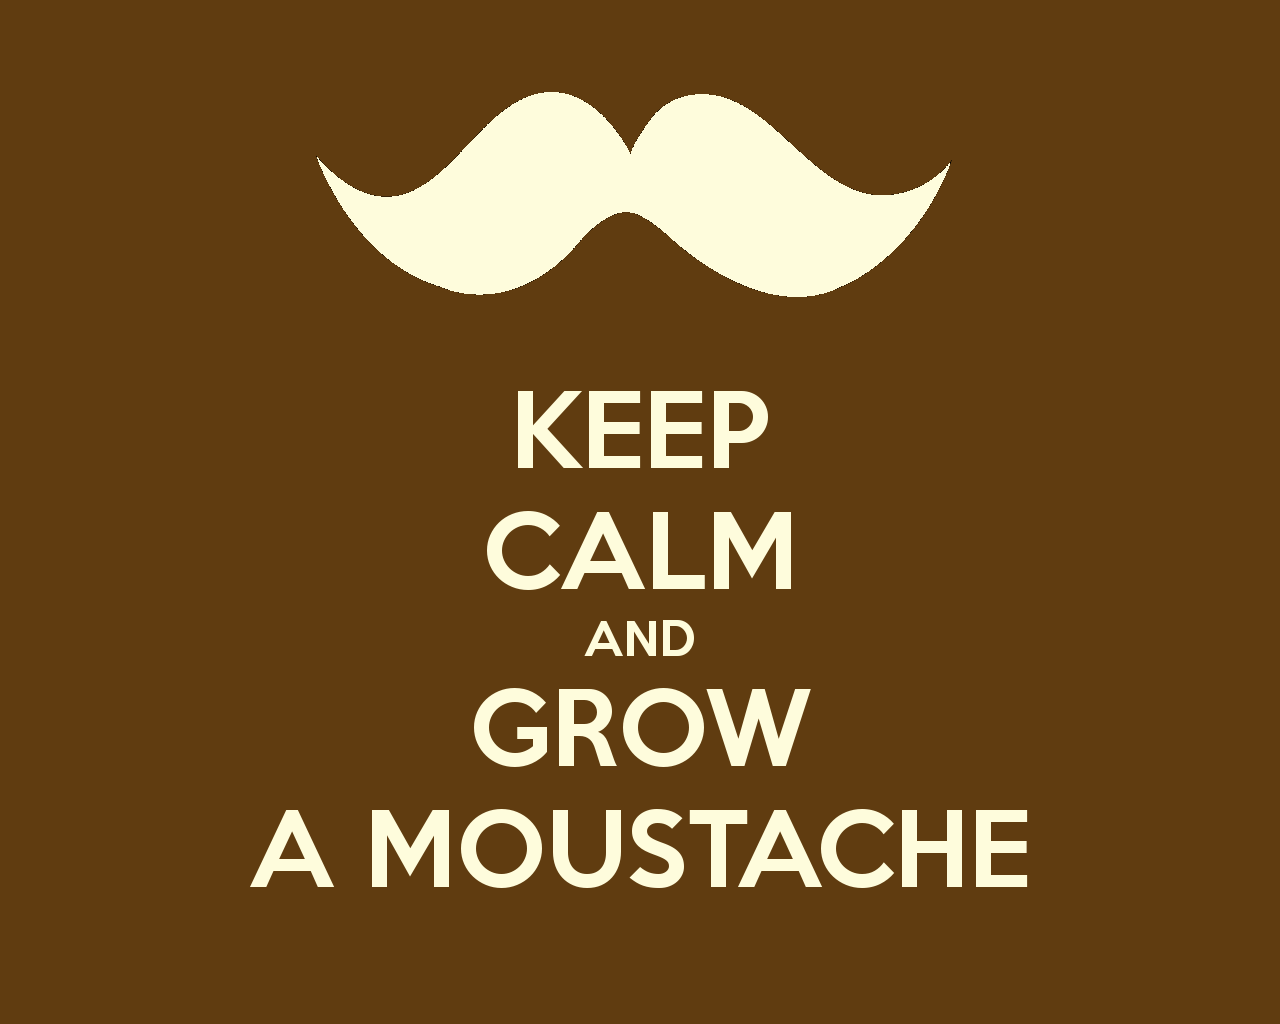 Mustache Keep Calm And Calm Image Graphic Design 1280x1024 Wallpaper